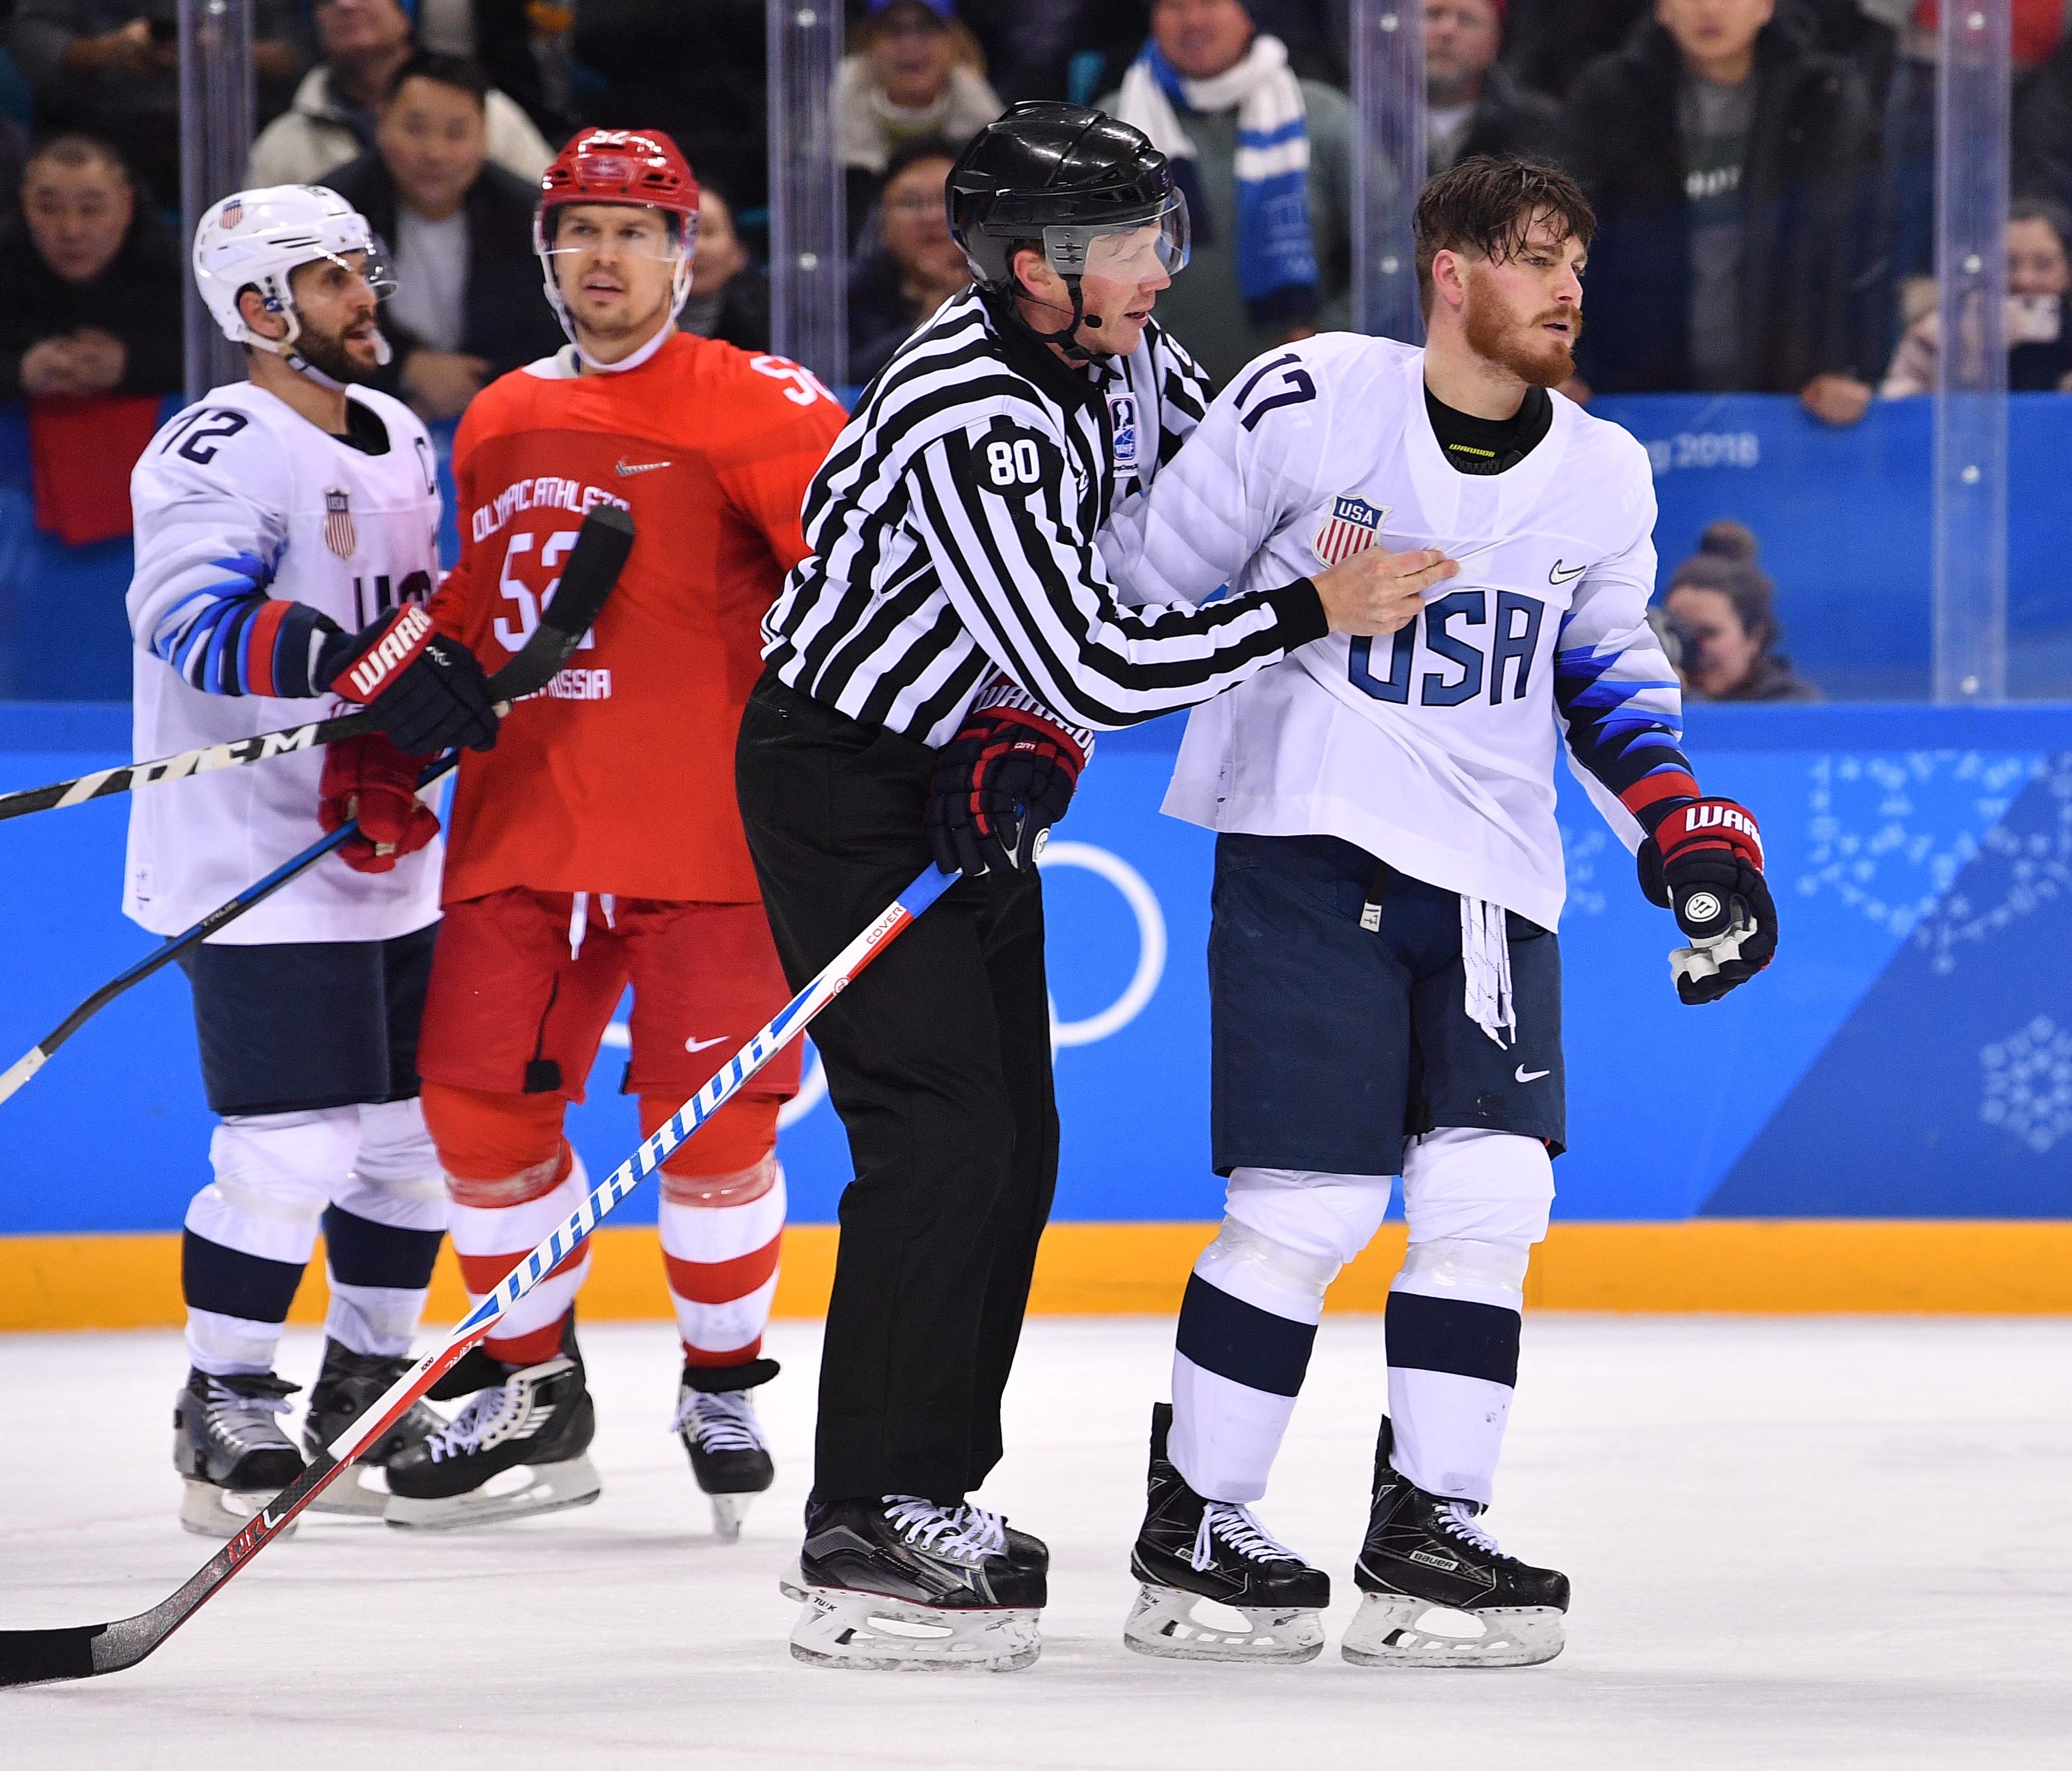 United States forward Chris Bourque (17) is pulled out of a fight with Russia players by an official in the second period during men's ice hockey Group B play in the Pyeongchang 2018 Olympic Winter Games.